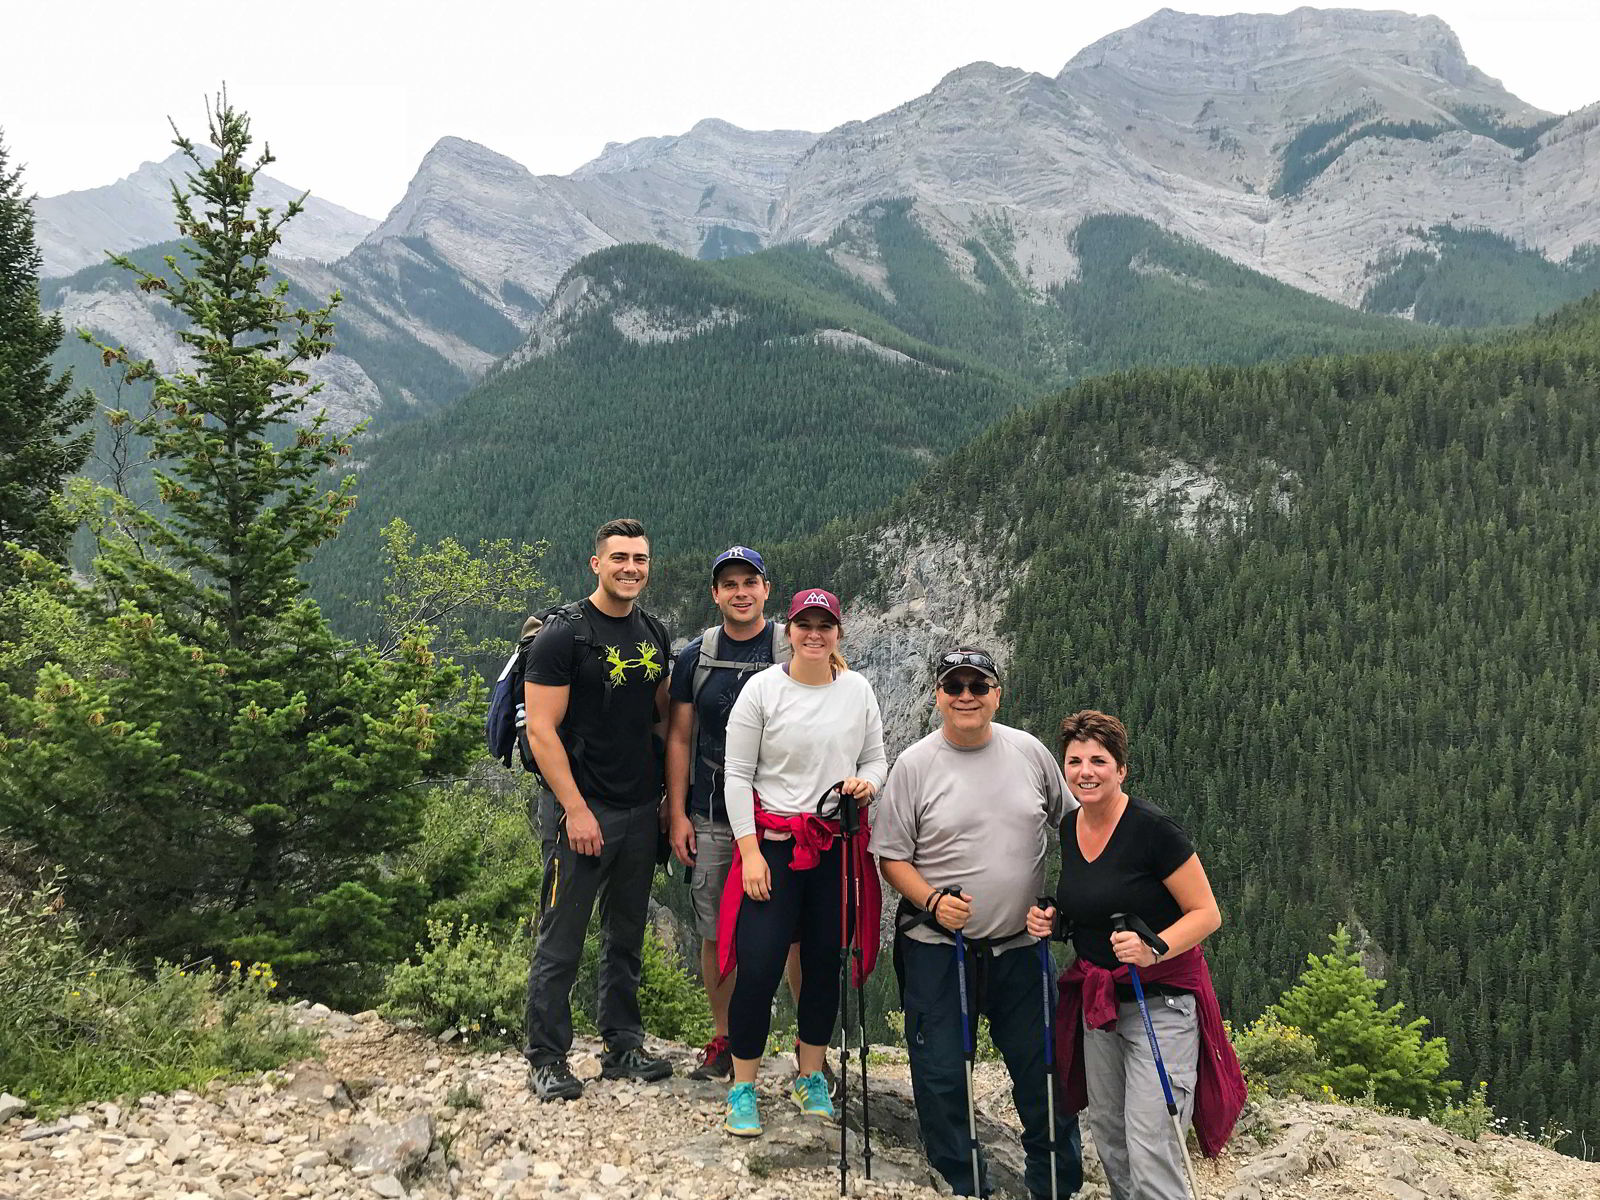 An image of Debbie Olsen and family on the Heart Mountain hike near Canmore, Alberta.